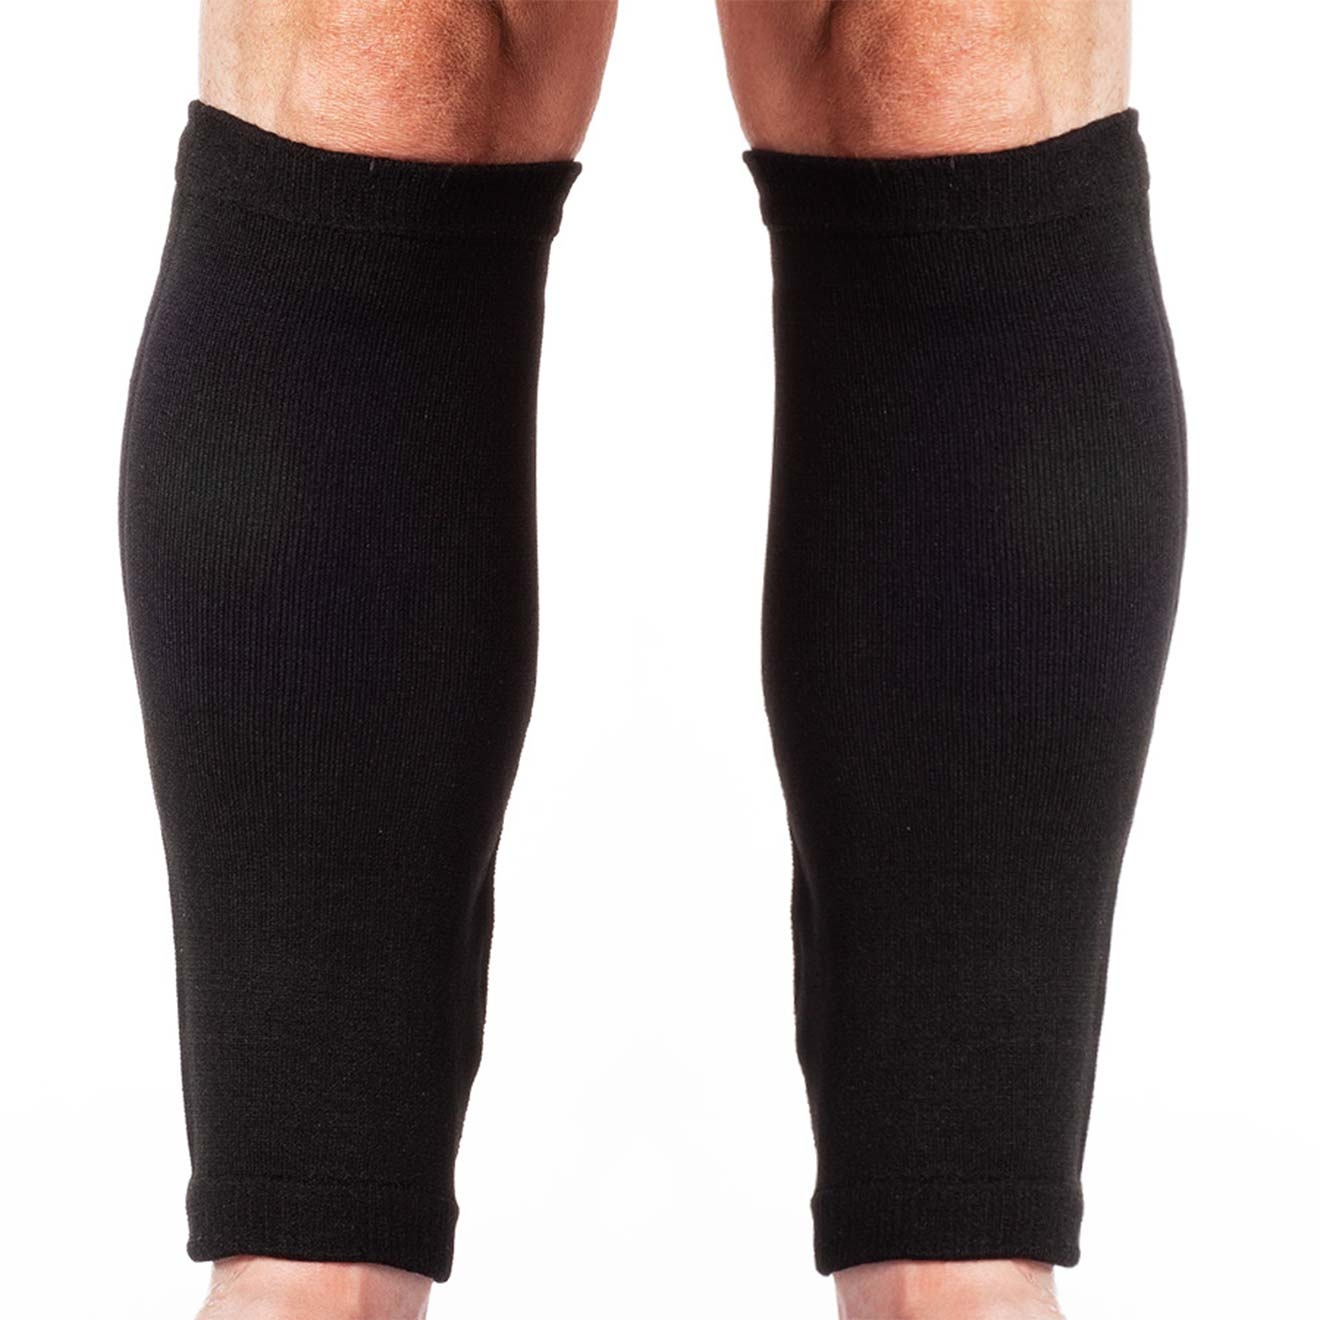 Leg Sleeves, Full Fit – Frail skin protection for larger & swollen legs Medium – Limb Keepers